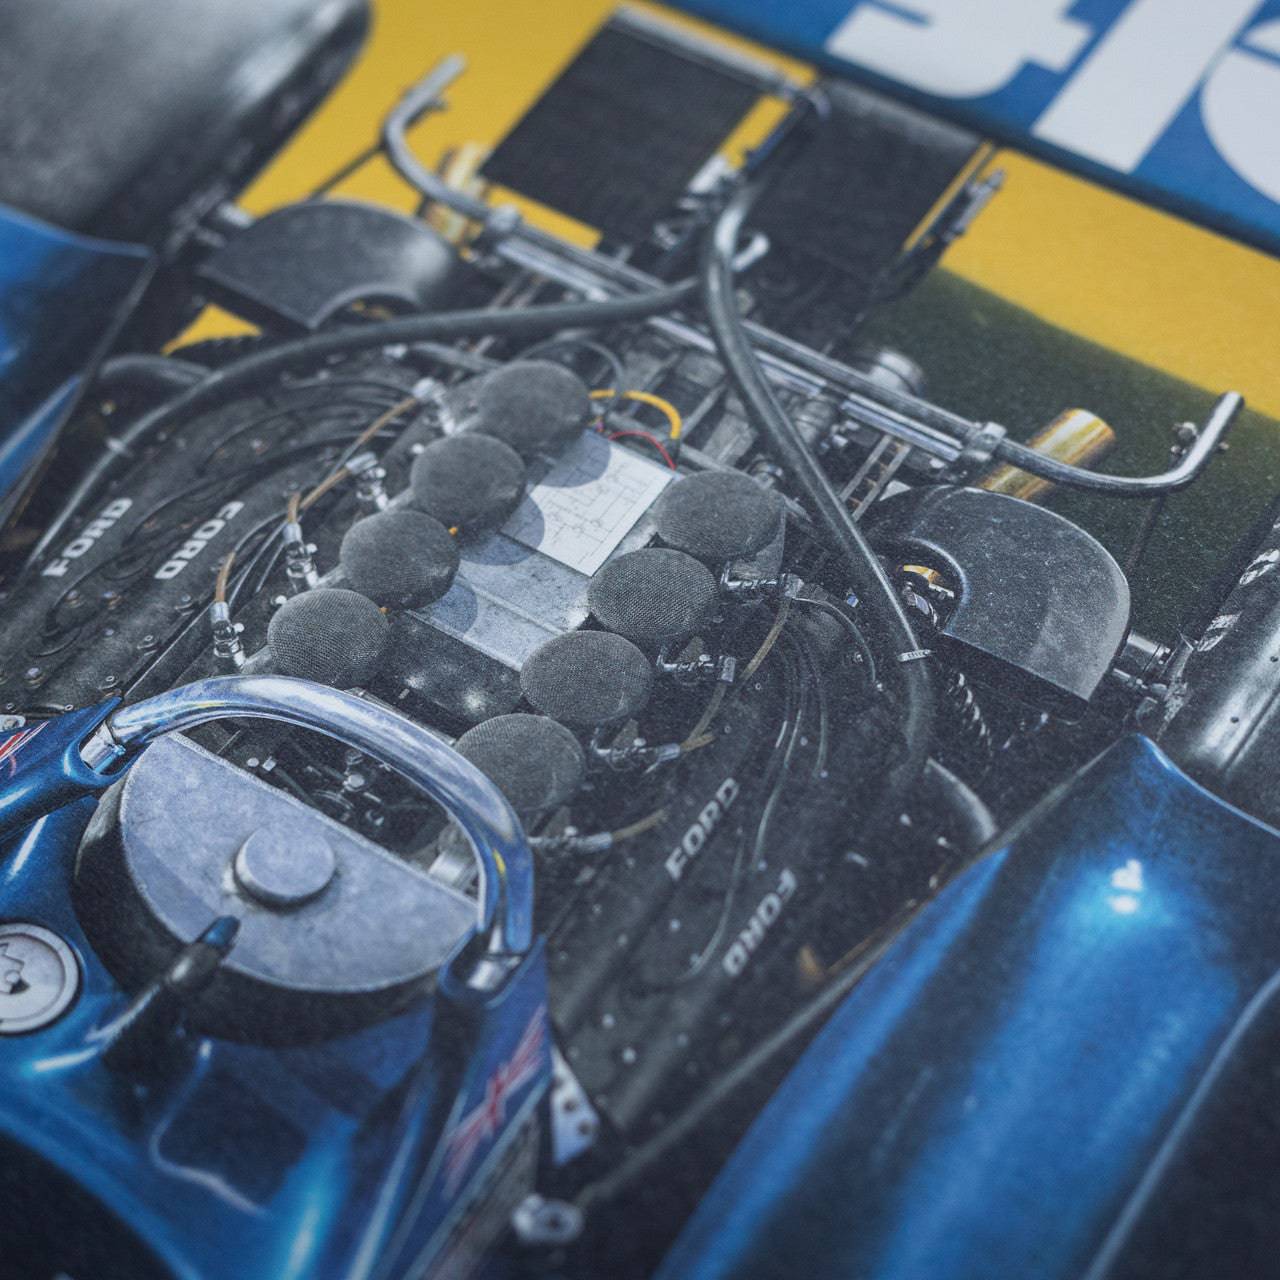 JODY SCHECKTER - TYRRELL P34 AT SWEDISH GRAND PRIX 1976 | SIGNED LIMITED EDITION  | Poster